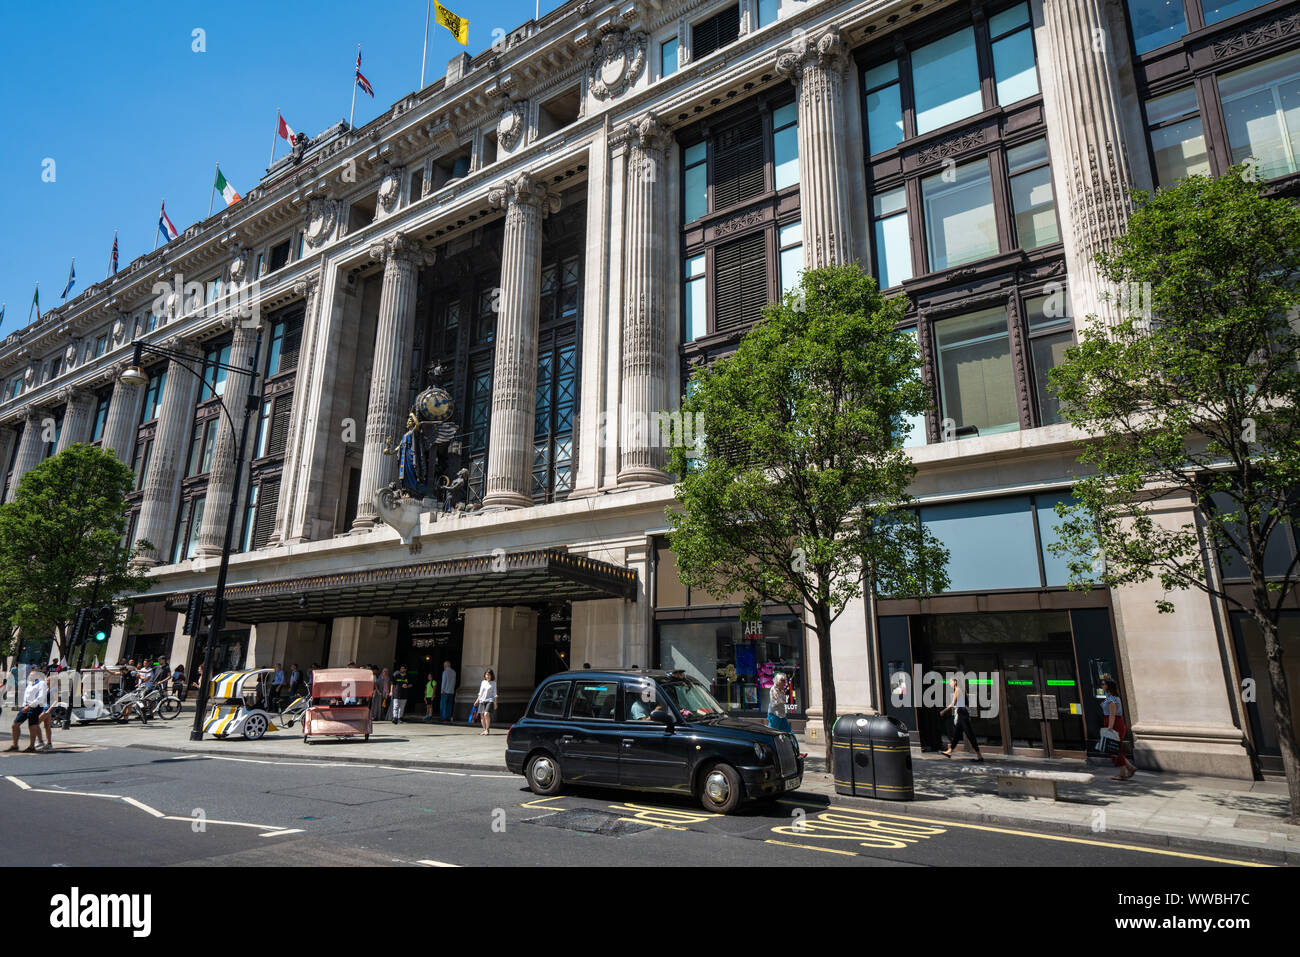 LONDON, UNITED KINGDOM - JULY 23: This is the Selfridges department store, a popular shopping destination on Oxford Street on July 23, 2019 in London Stock Photo